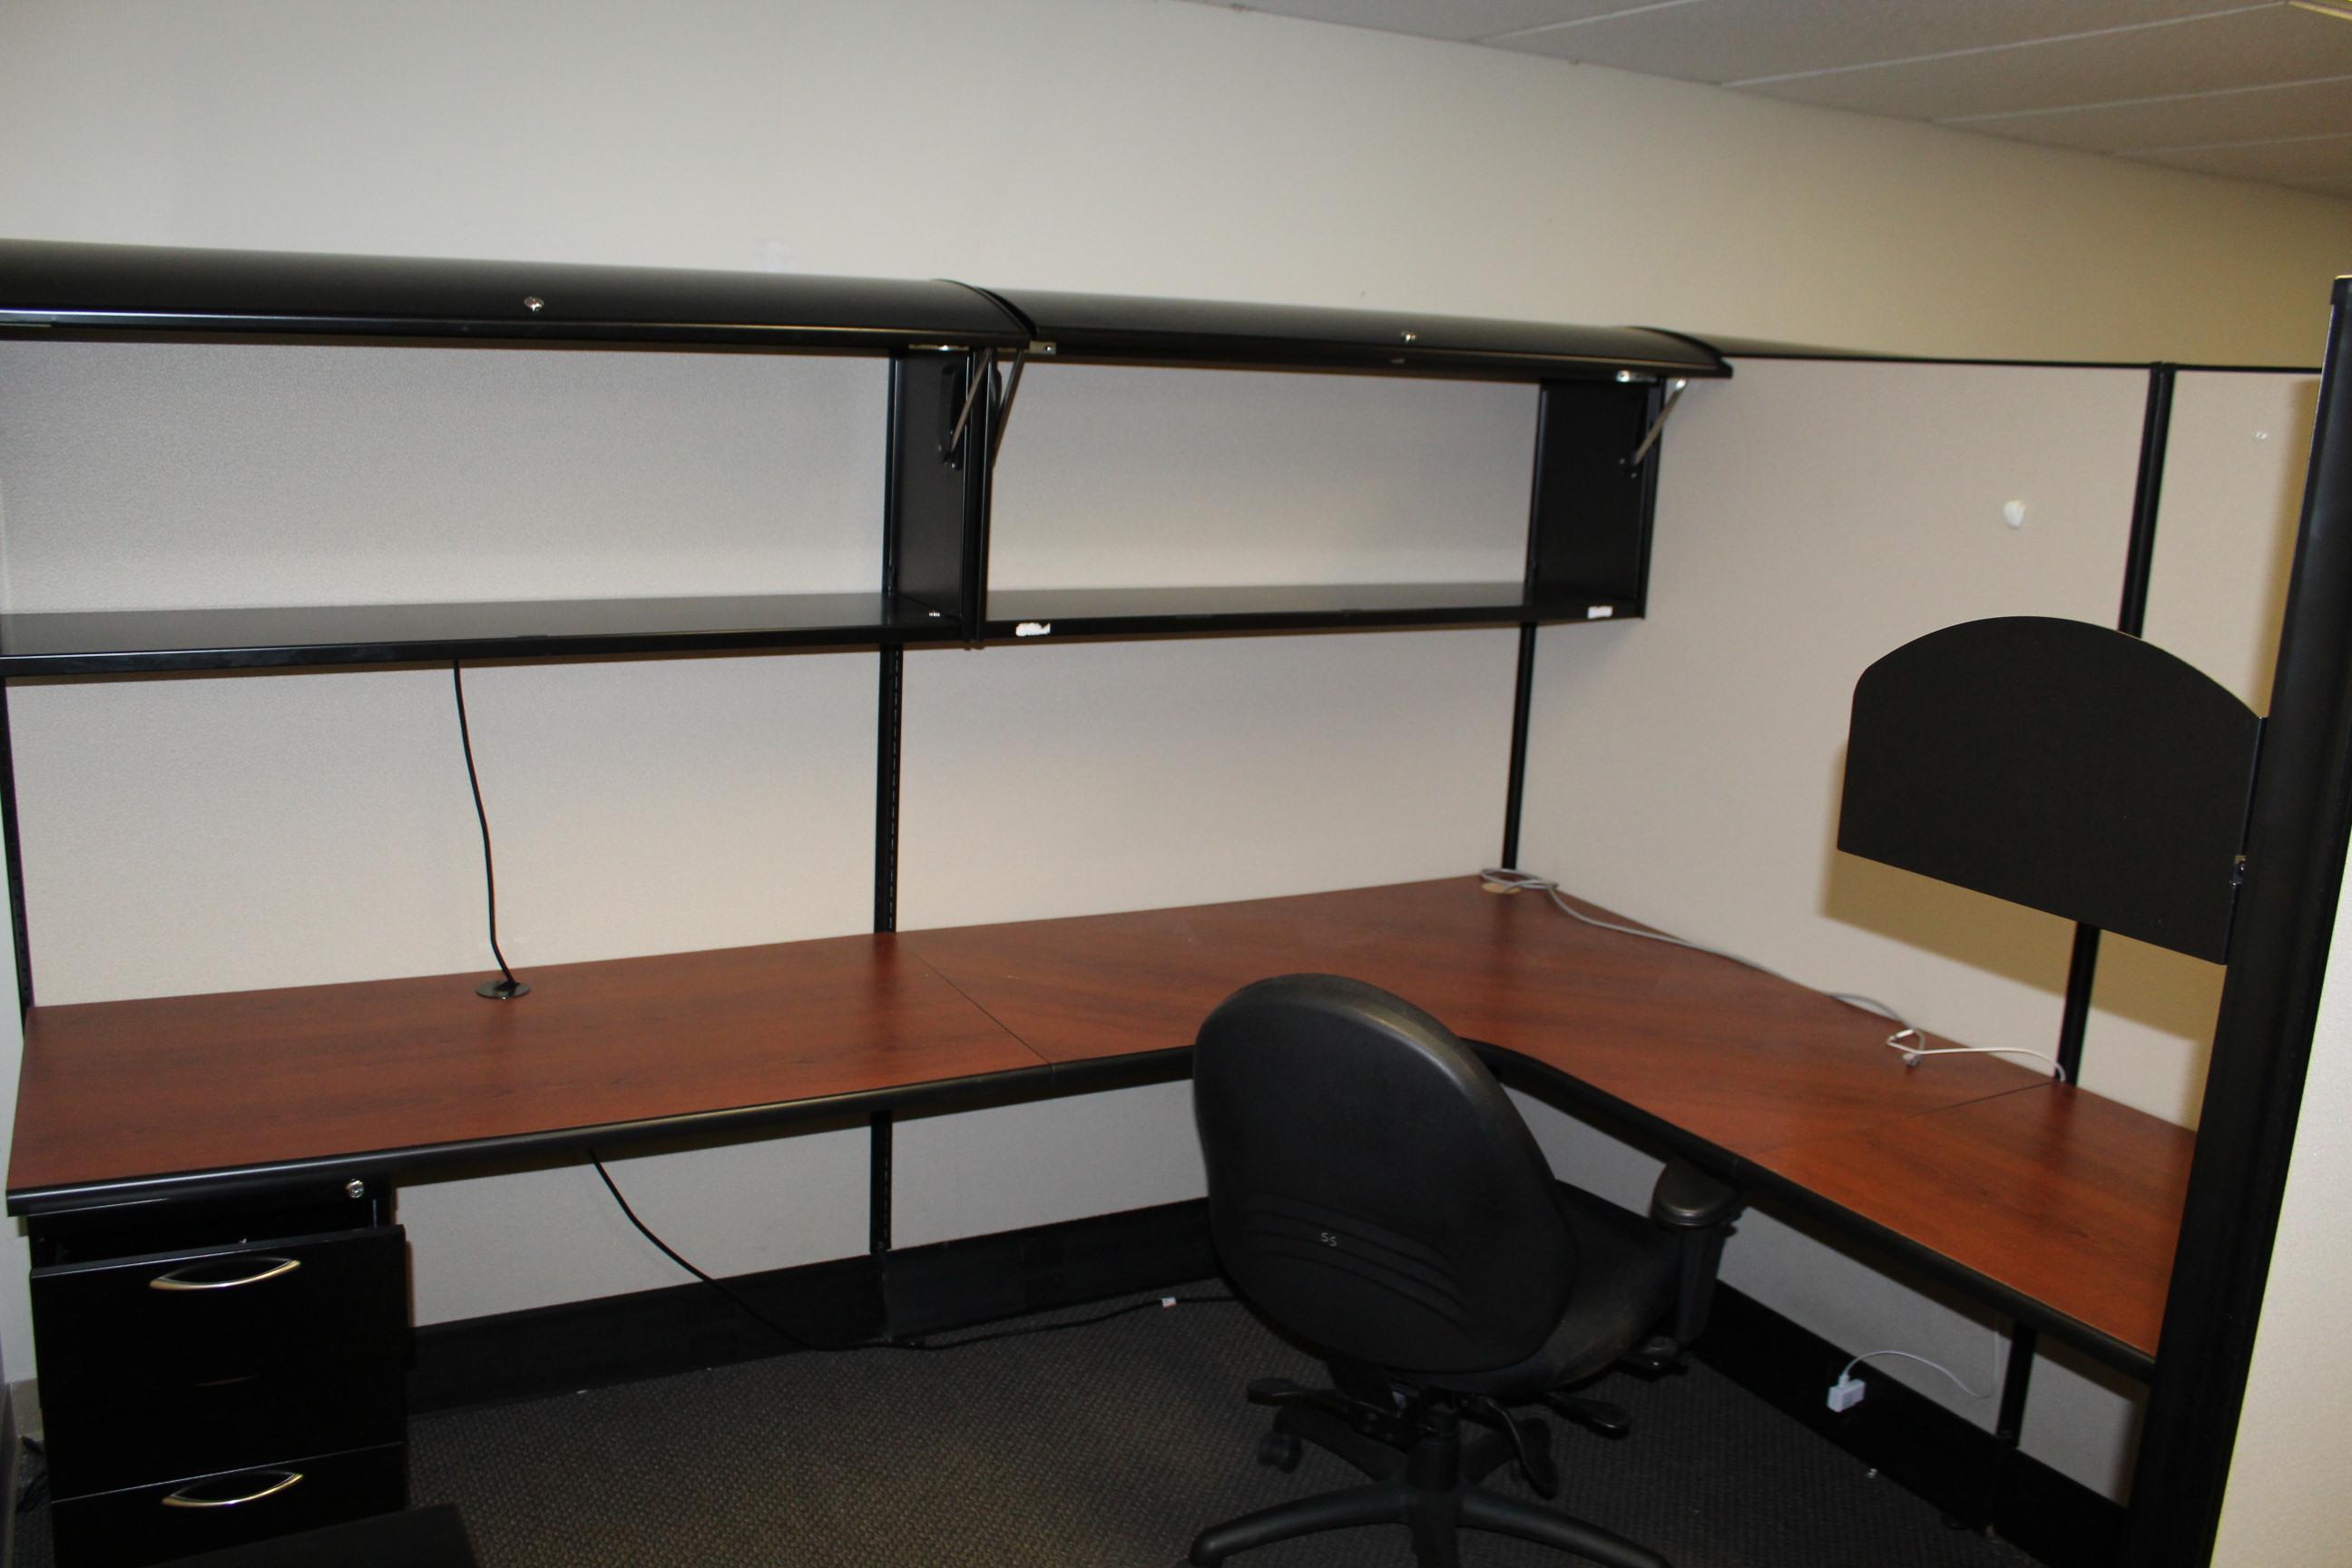 Three Cubicle Work Stations & Contents (desks, chairs, wipe boards, etc.)